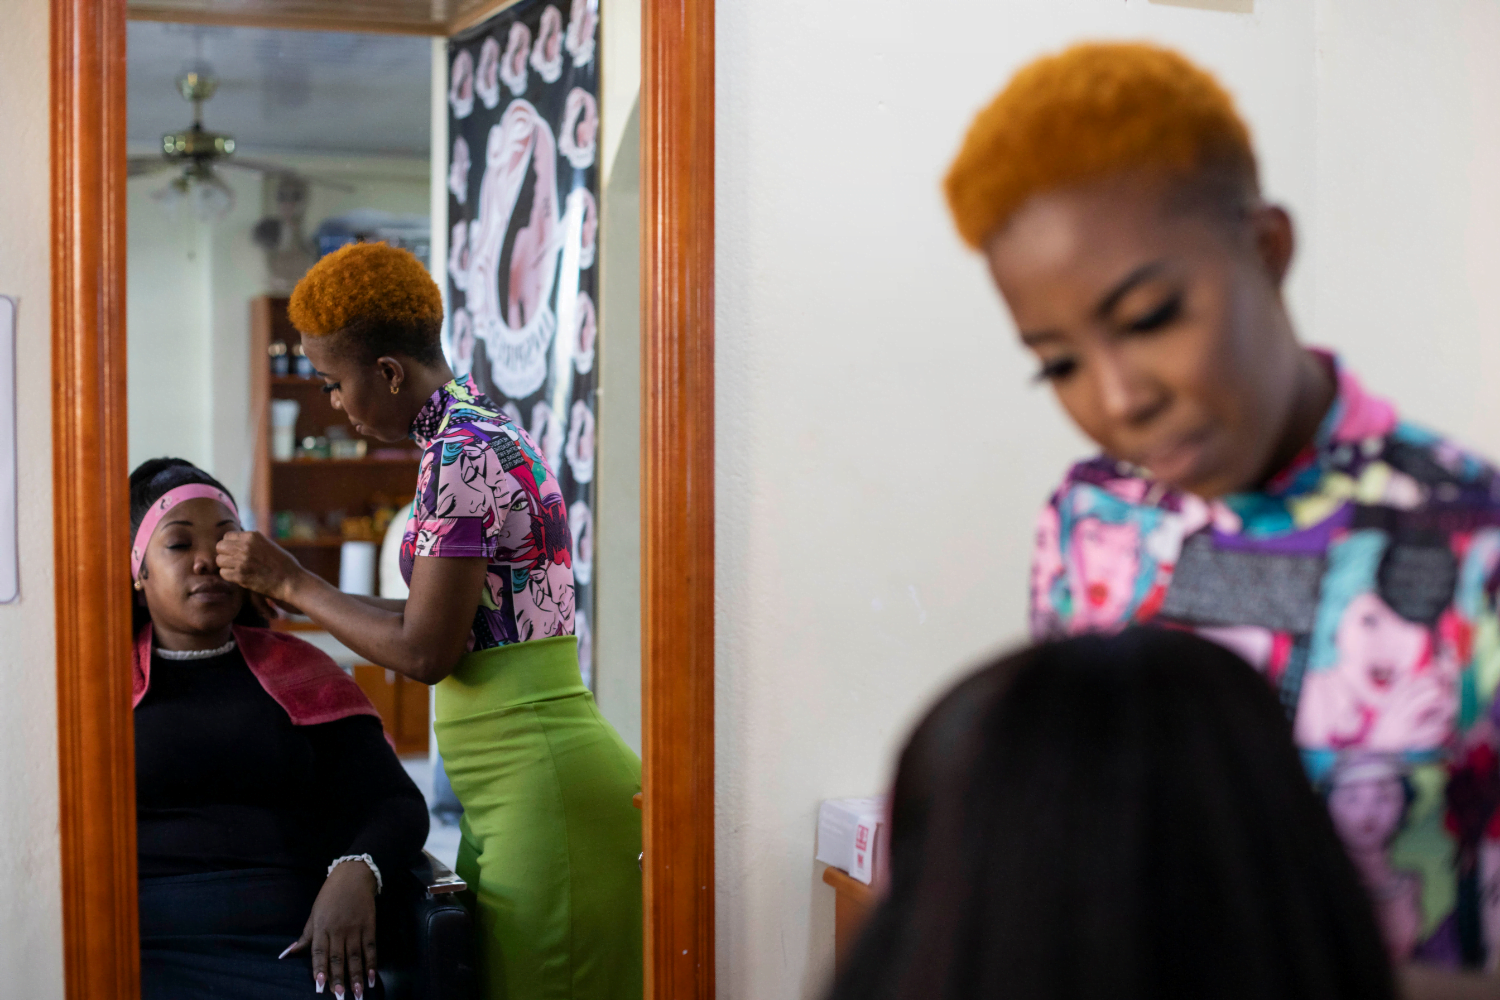 Latoya Rigby, Owner, Inspired Beauty Salon, Guyana works on a client's makeup.